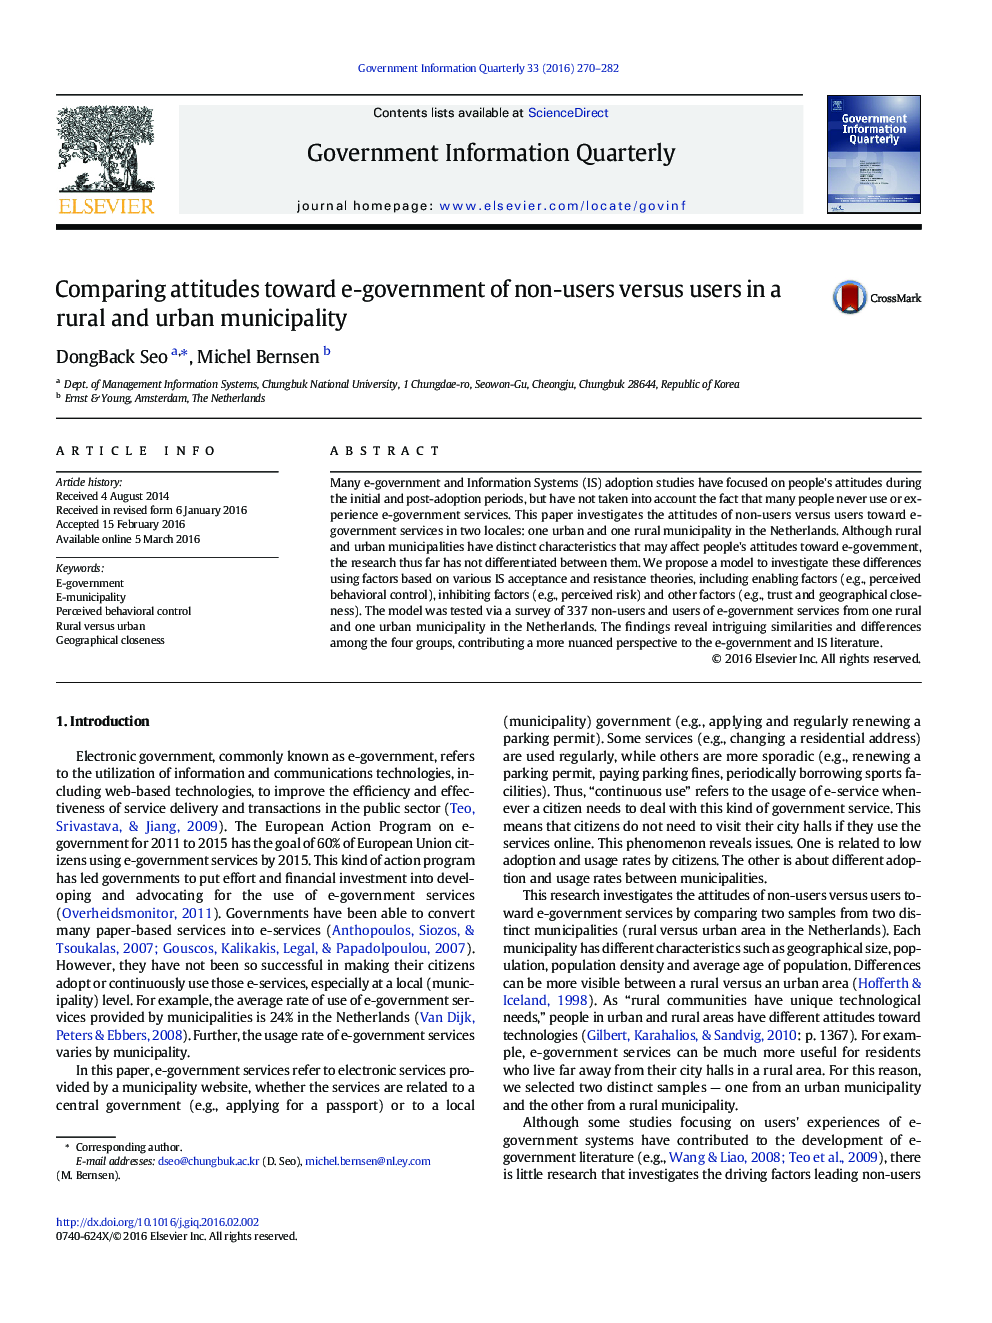 Comparing attitudes toward e-government of non-users versus users in a rural and urban municipality